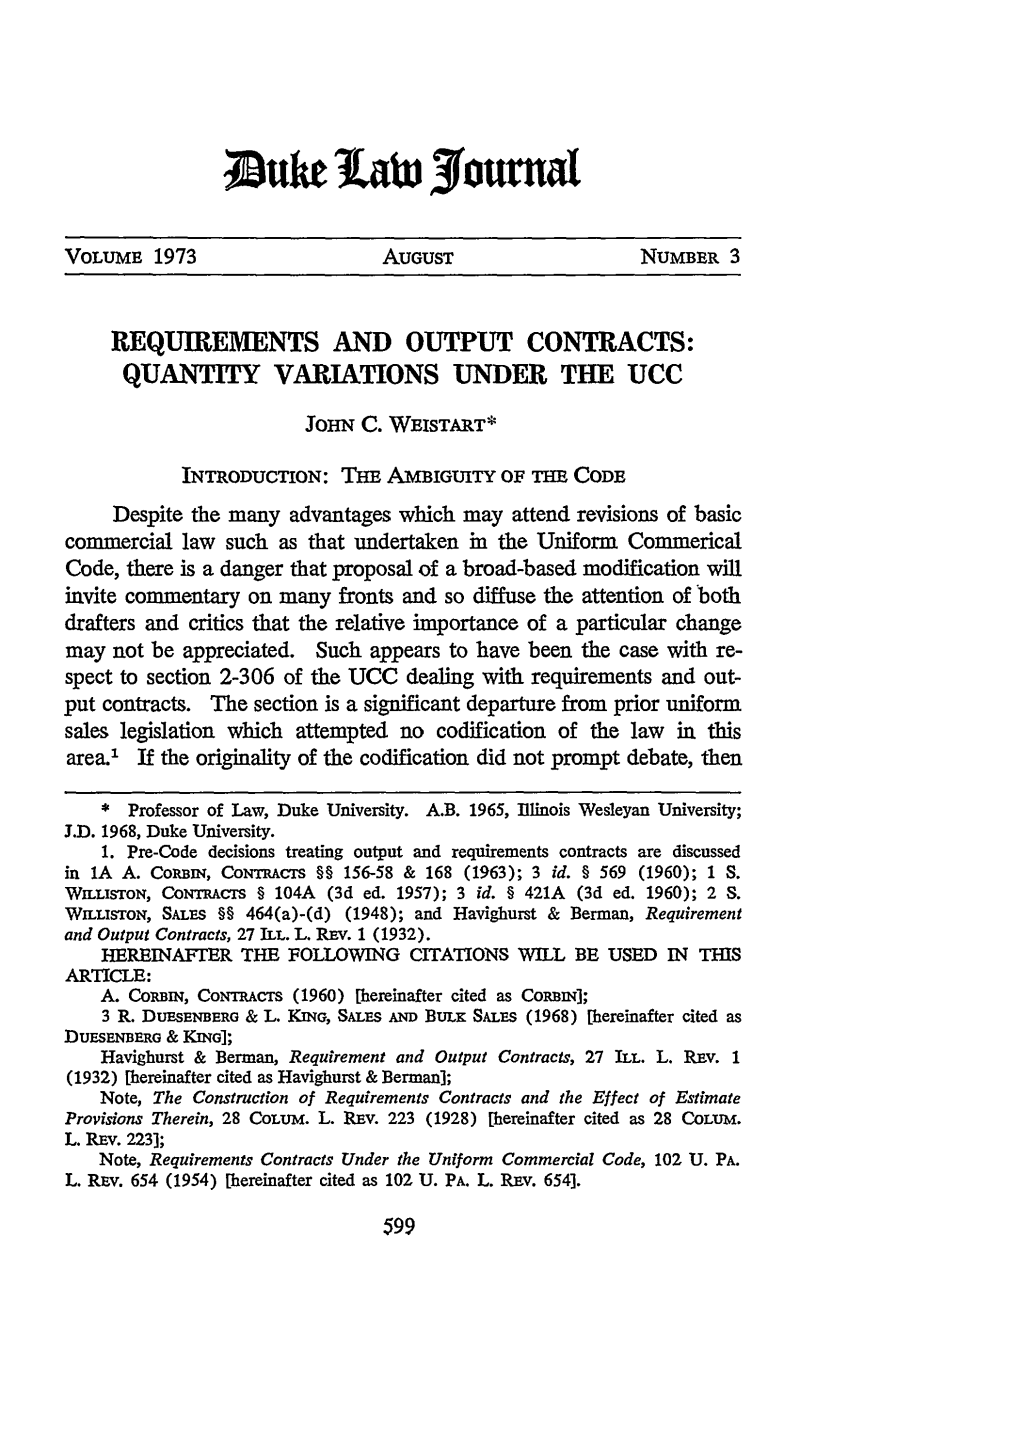 Requirements and Output Contracts: Quantity Variations Under the Ucc